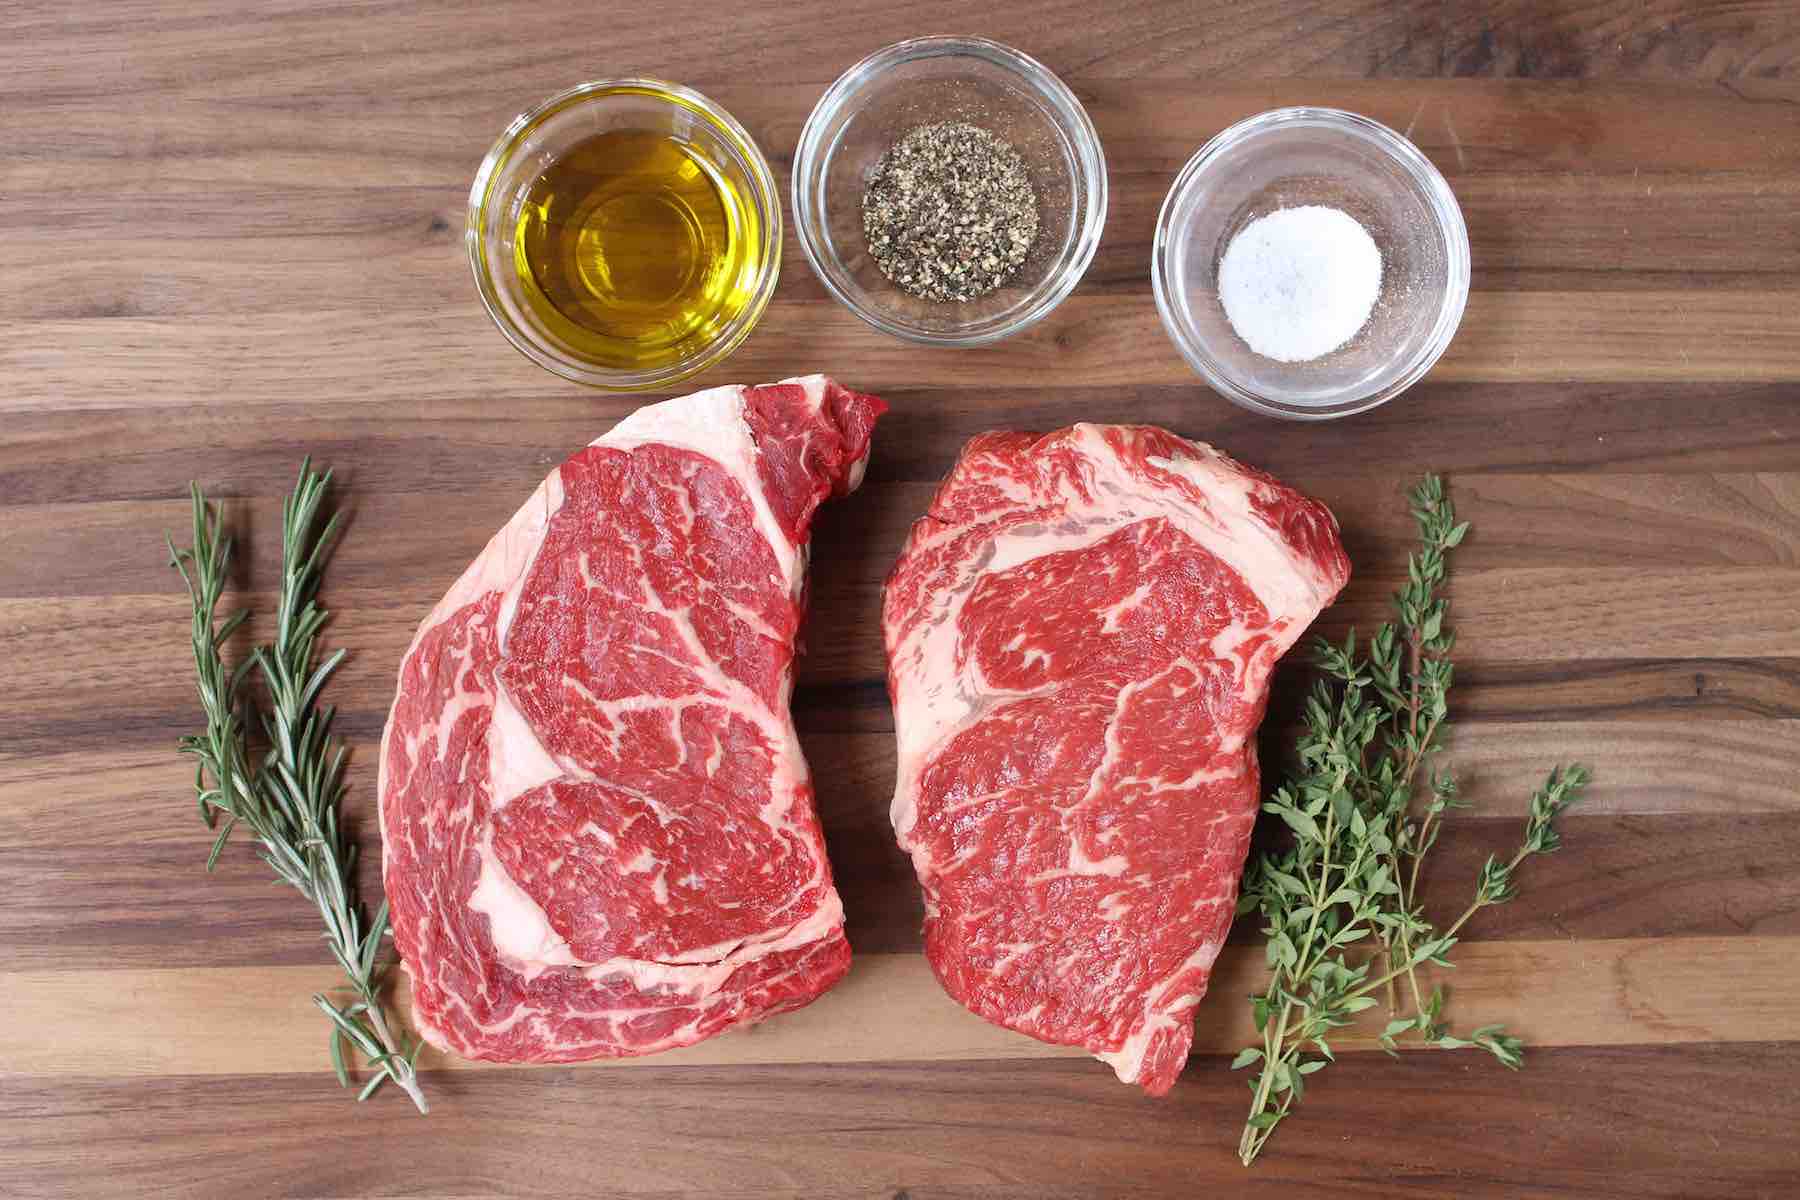 The best types of steak are tender, juicy and well-marbled.